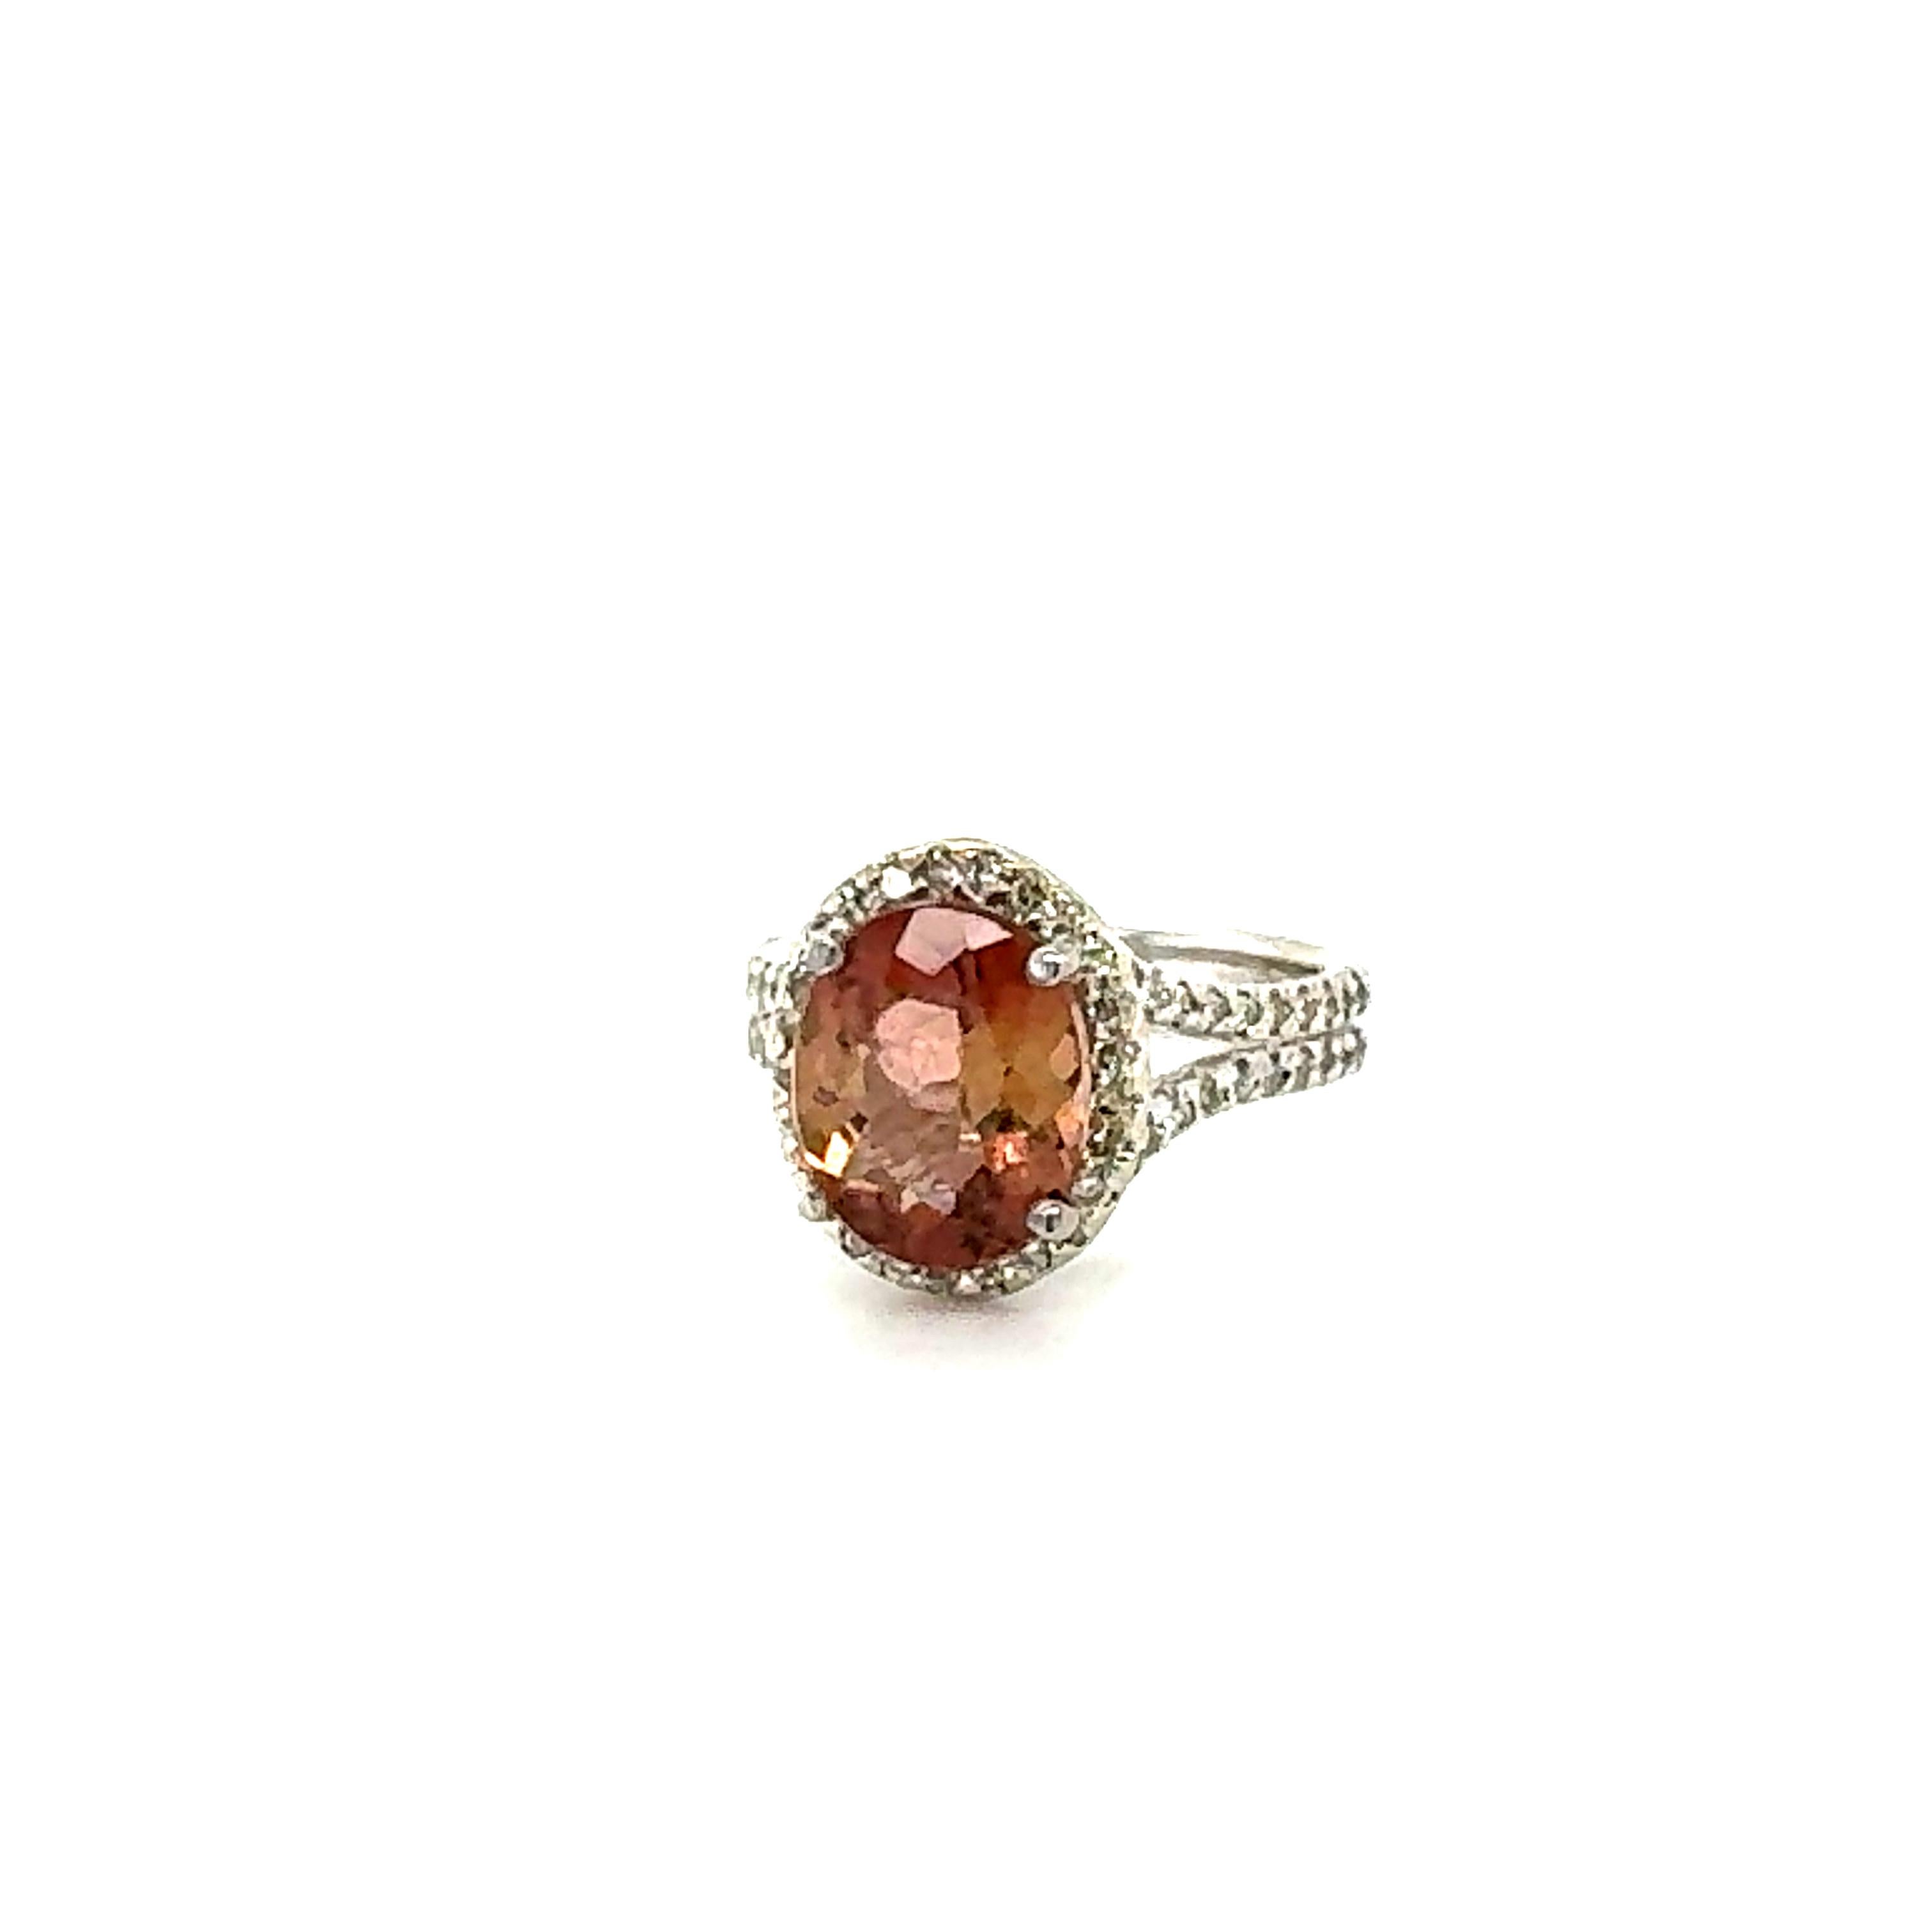 Super gorgeous 4.00 Carat Dual Color Tourmaline and Diamond 14K White Gold Cocktail Ring!

This ring has a 3.49 carat Oval Cut Dual Color Tourmaline that is set in the center of the ring and is surrounded by a Halo of 40 Round Cut Diamonds that